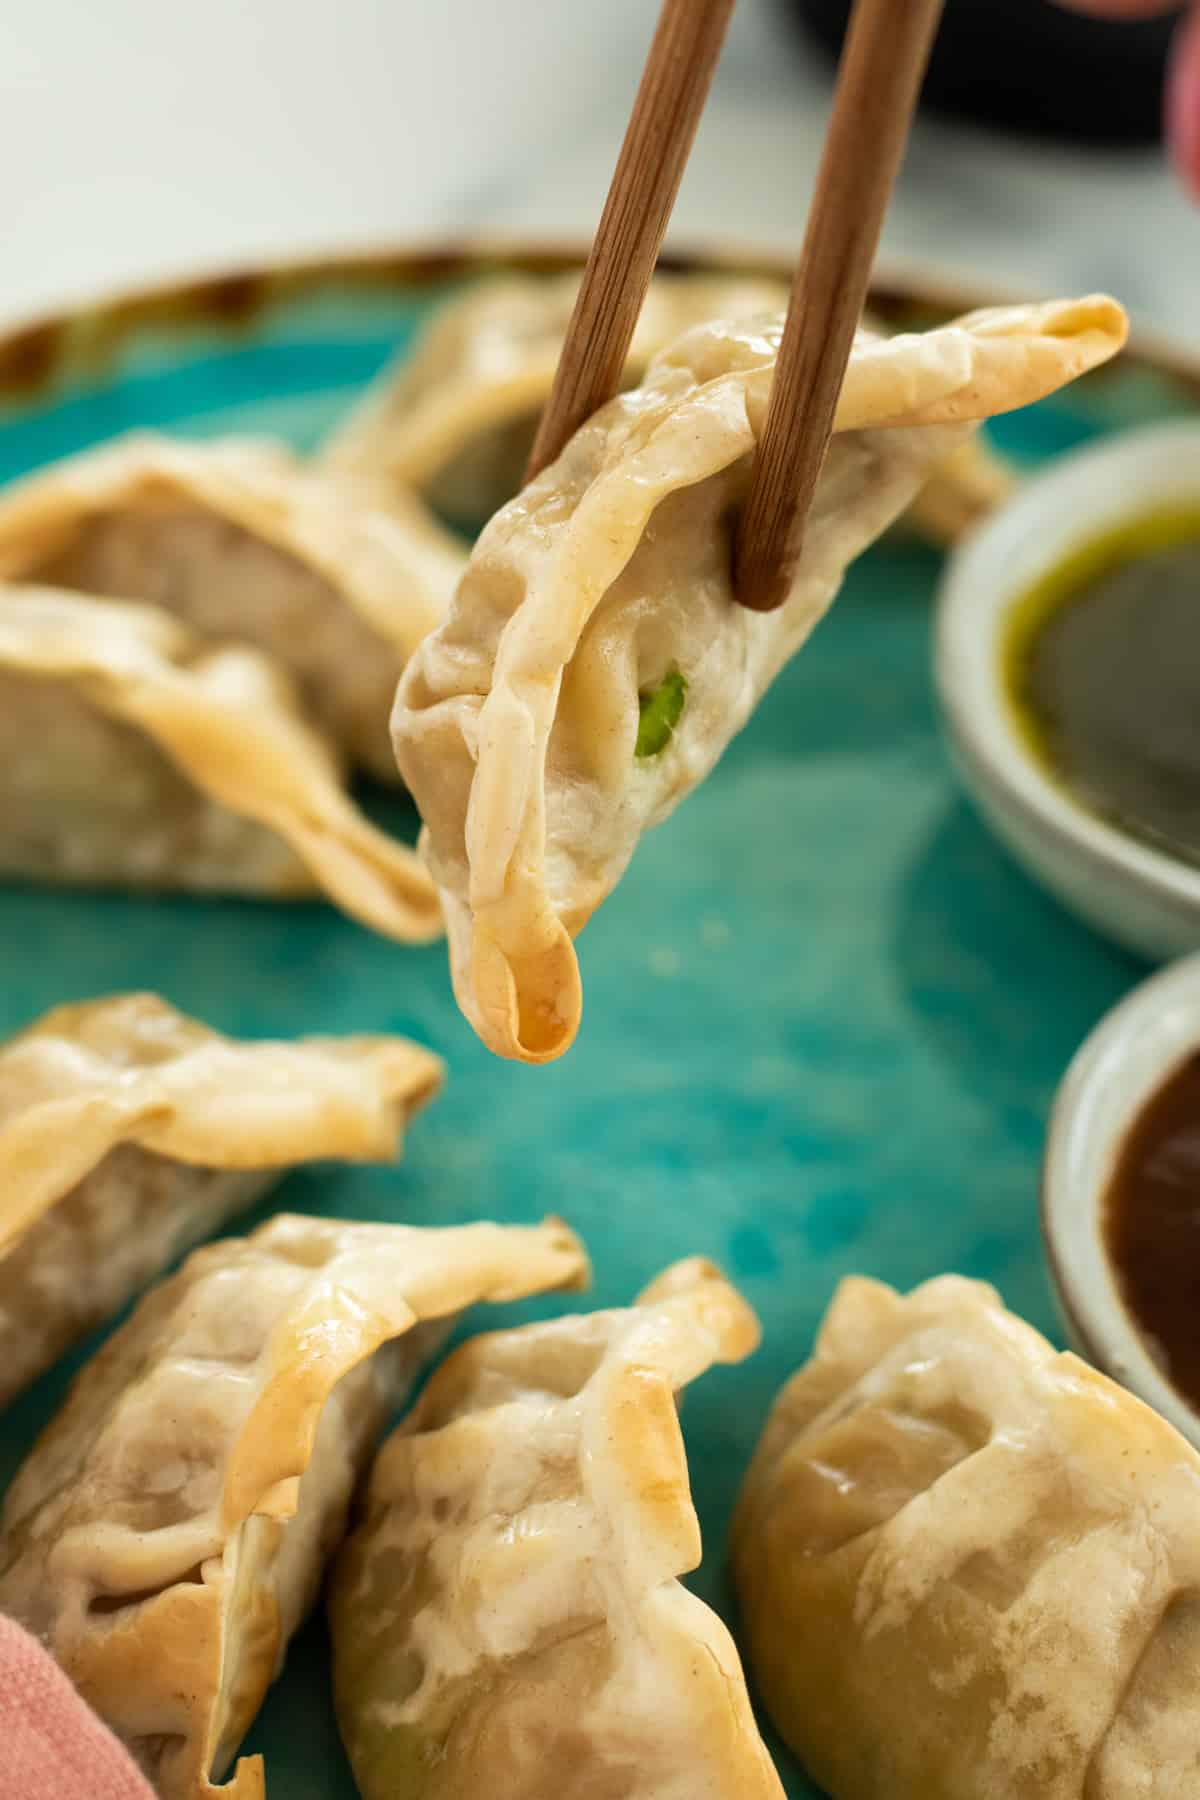 a dumpling being picked up with chopsticks.